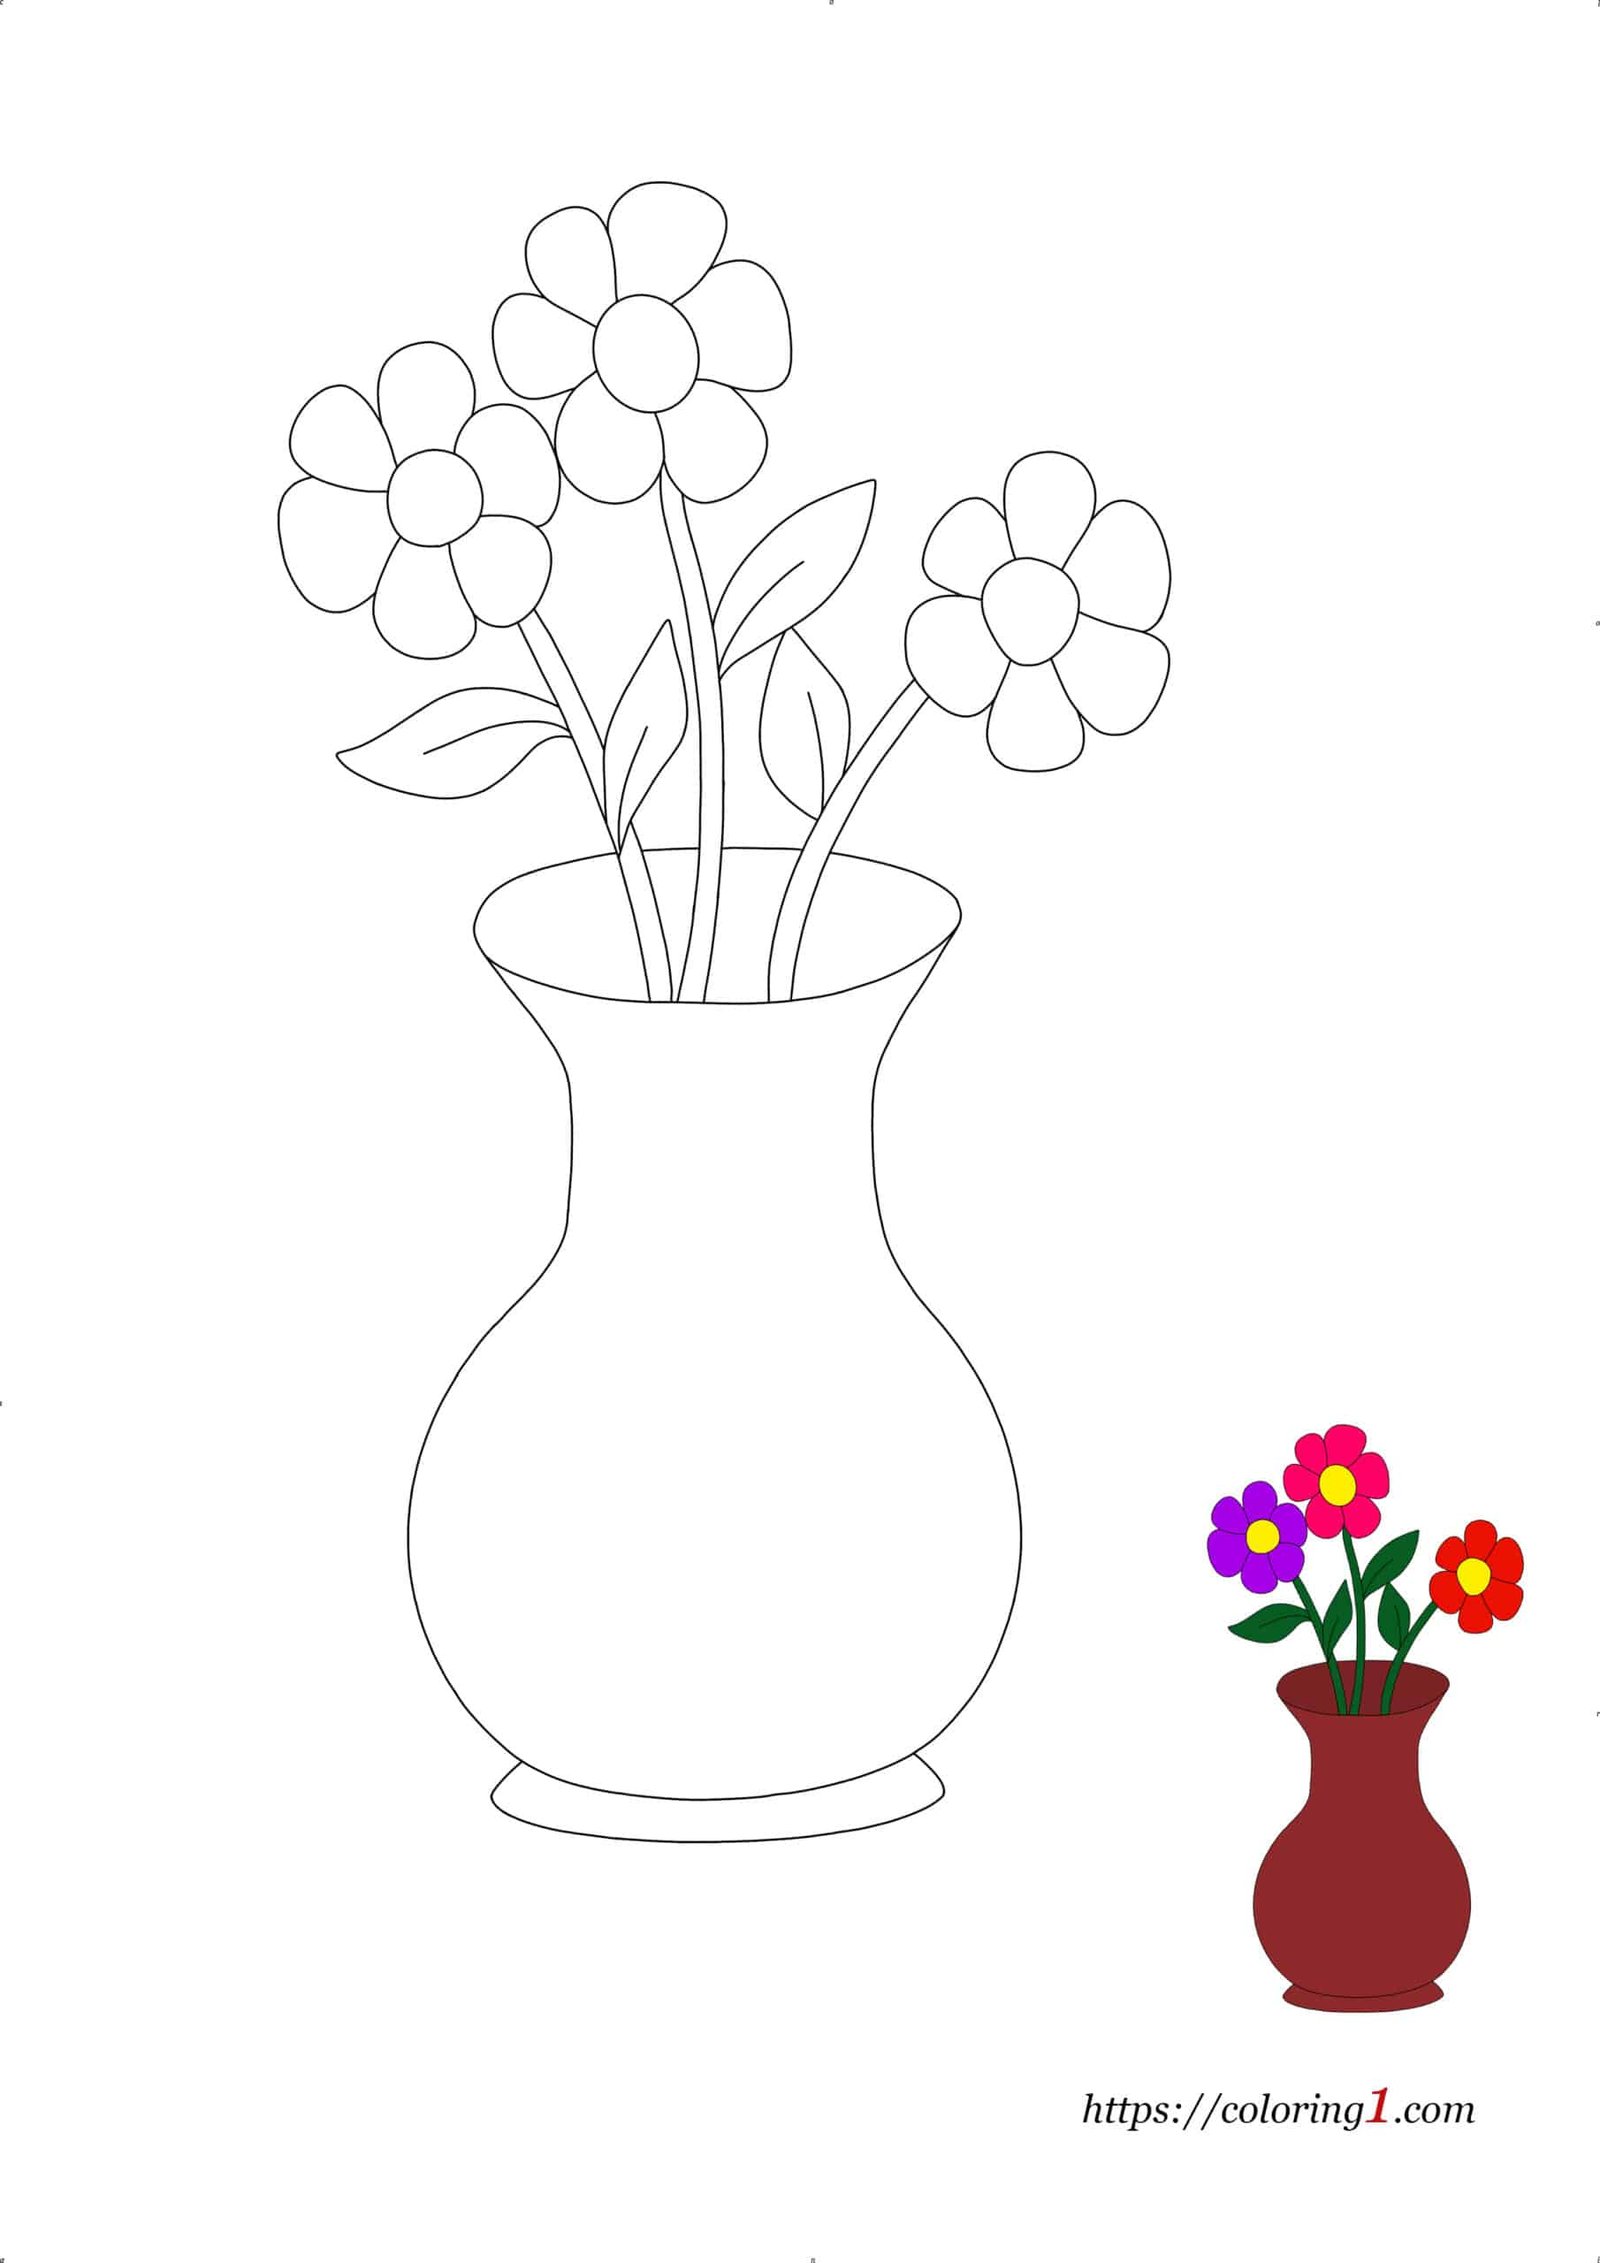 Flower Vase easy printable coloring page to print for girls and boys